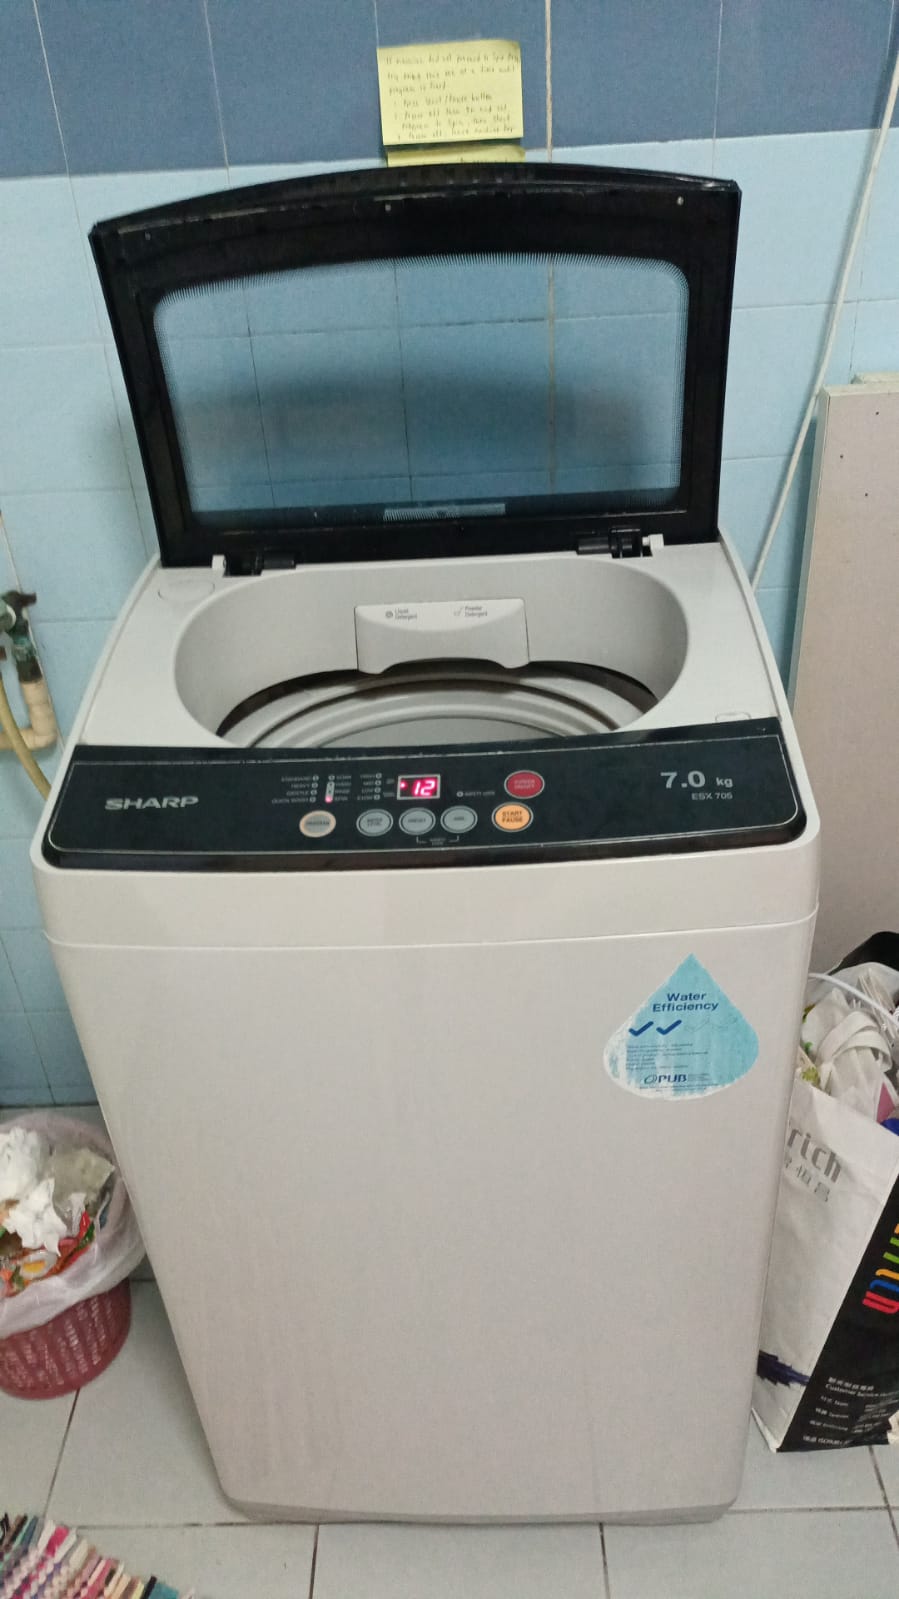 Washing Machine Checking For Control Panel Issue 6